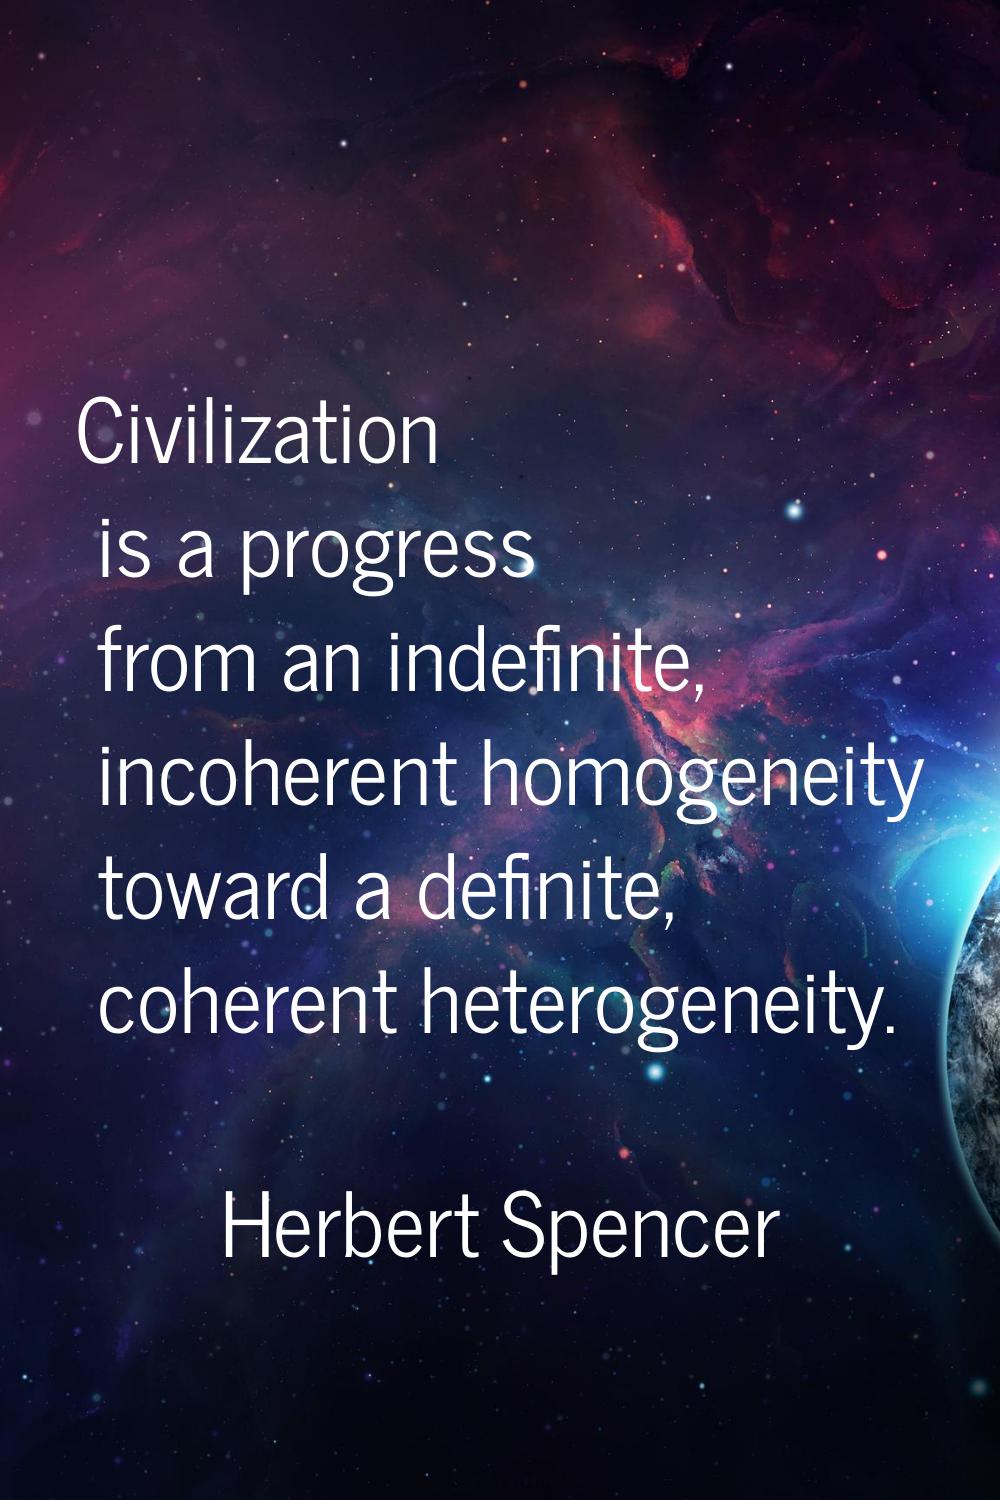 Civilization is a progress from an indefinite, incoherent homogeneity toward a definite, coherent h